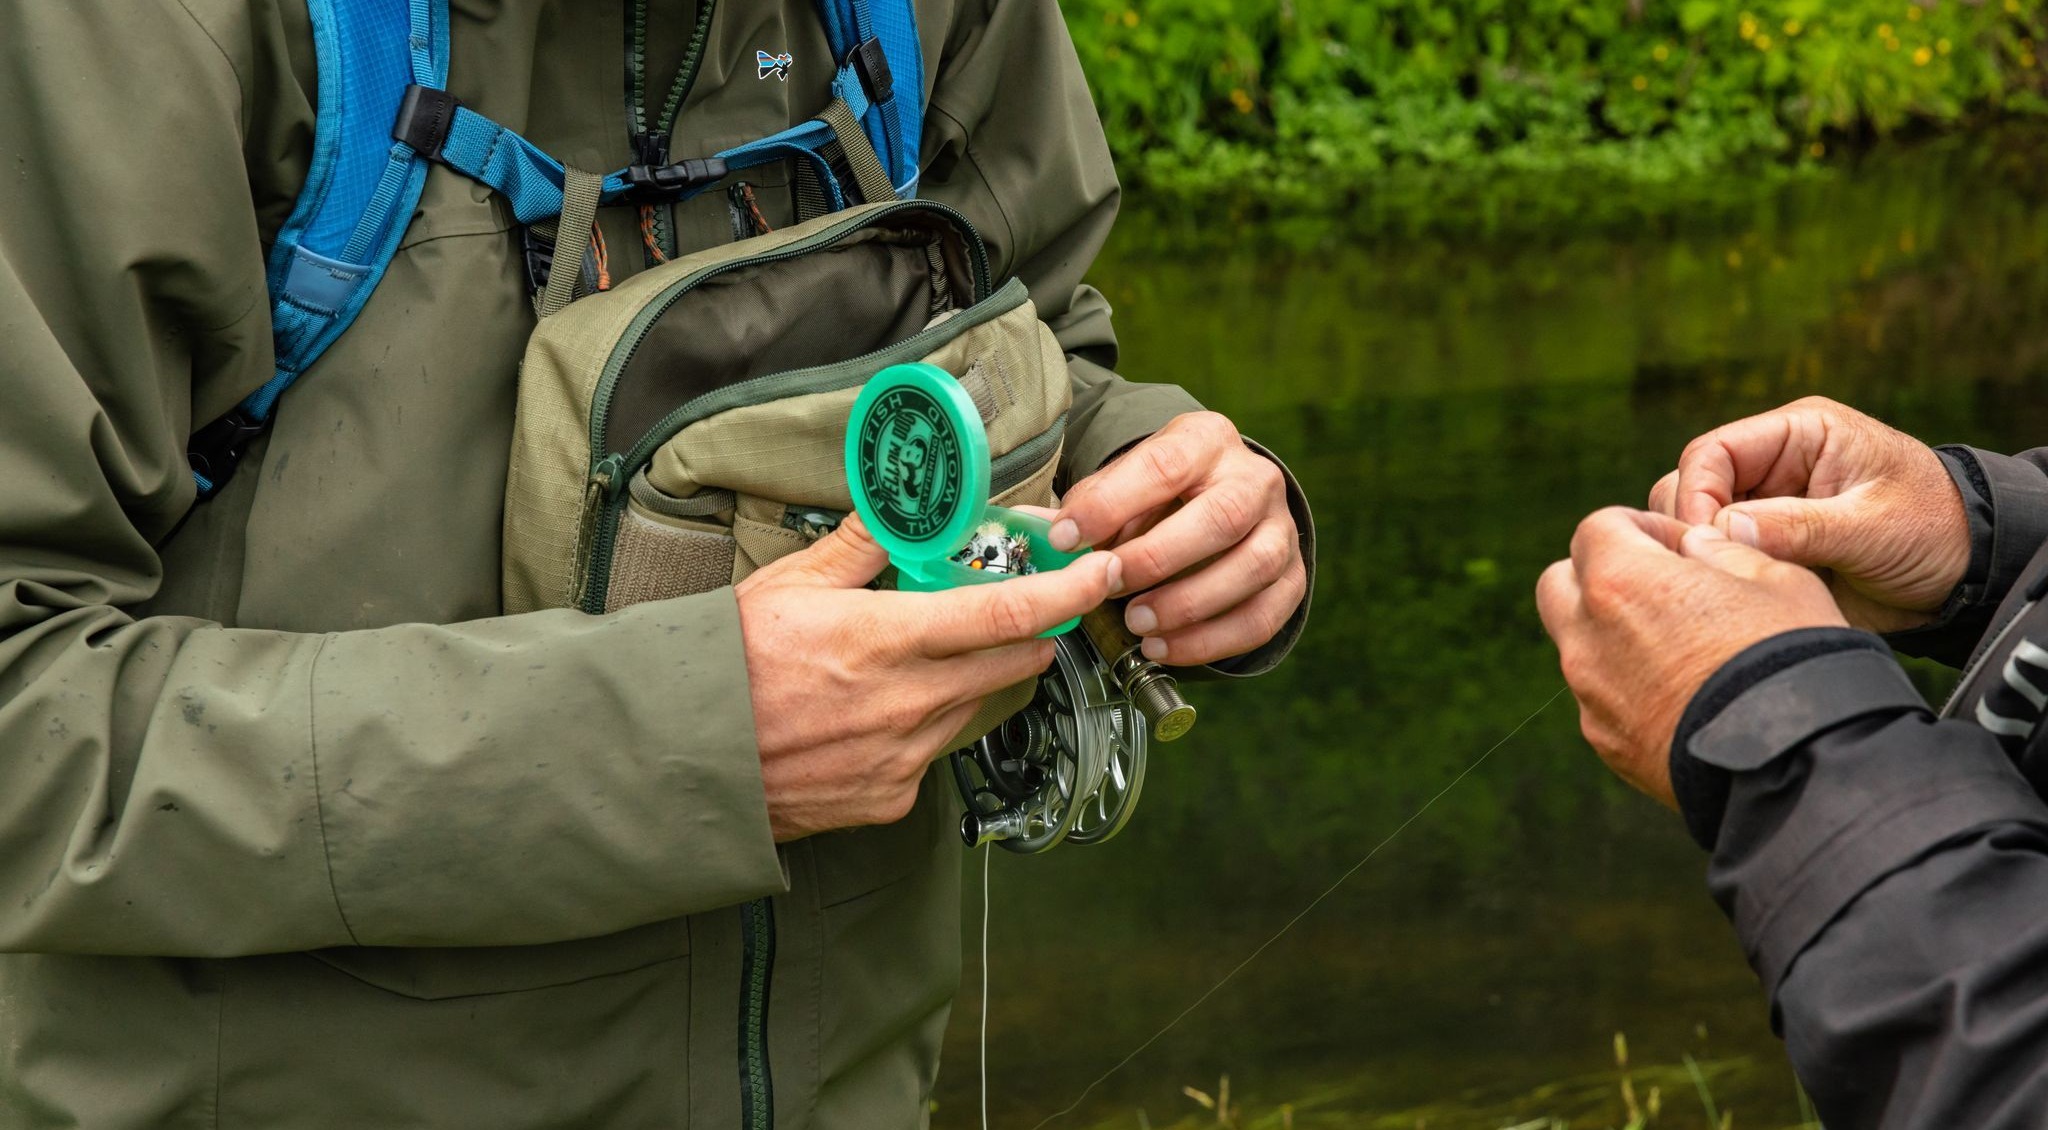 Shop Fly Fishing Chest Packs: Fishpond, Simms, and More